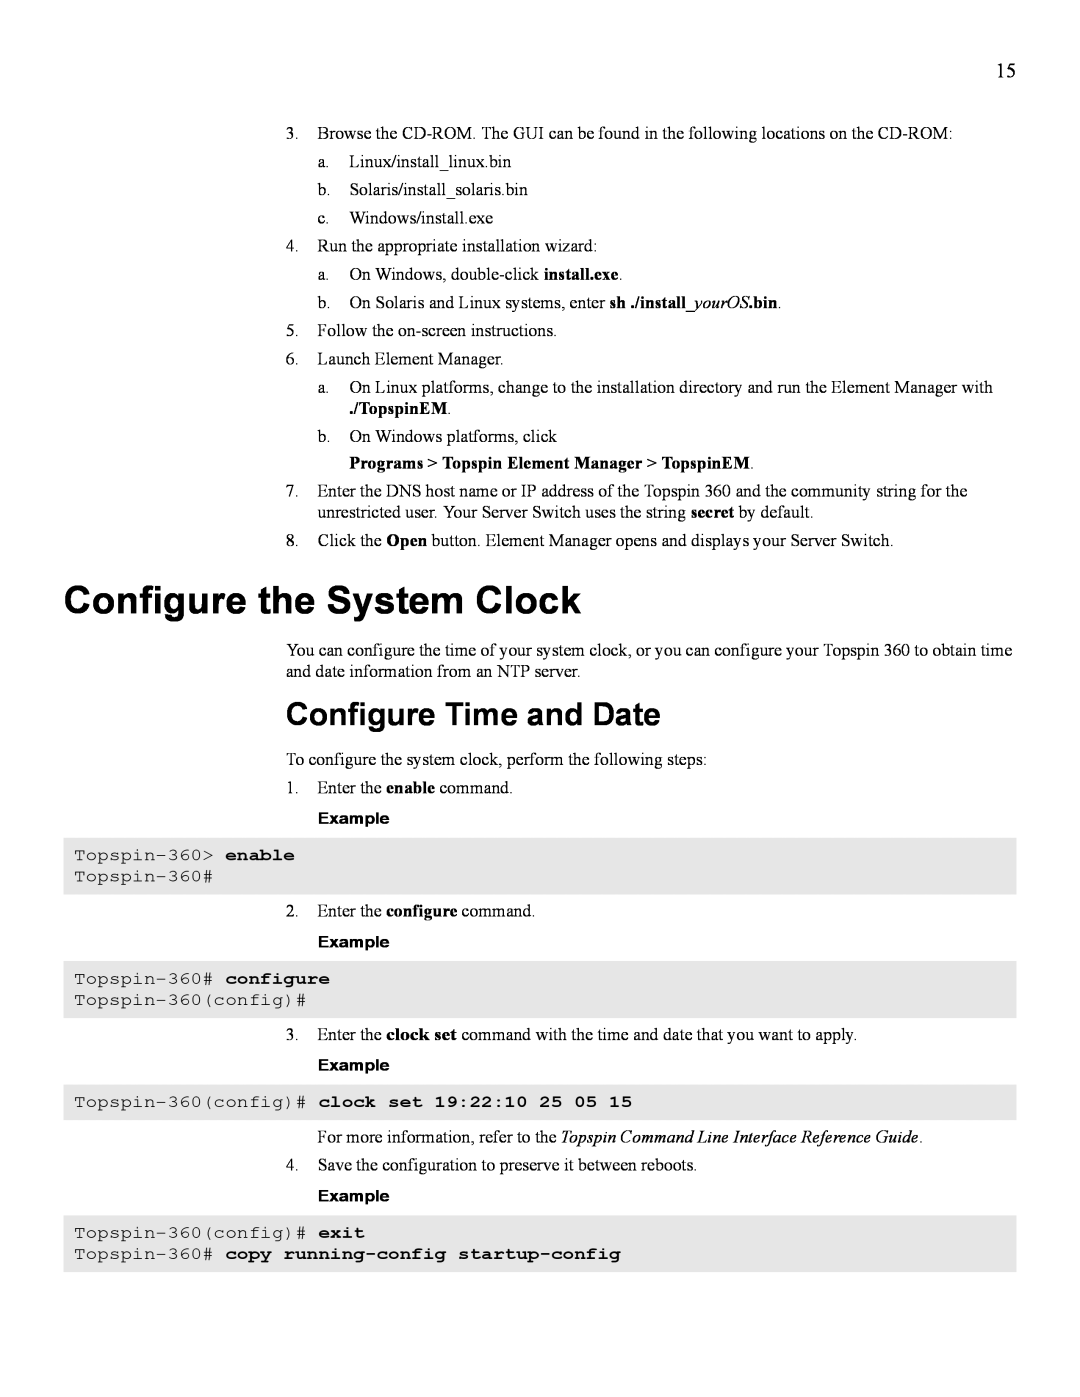 Cisco Systems SFS 3012 quick start Configure the System Clock, Configure Time and Date, TopspinEM 